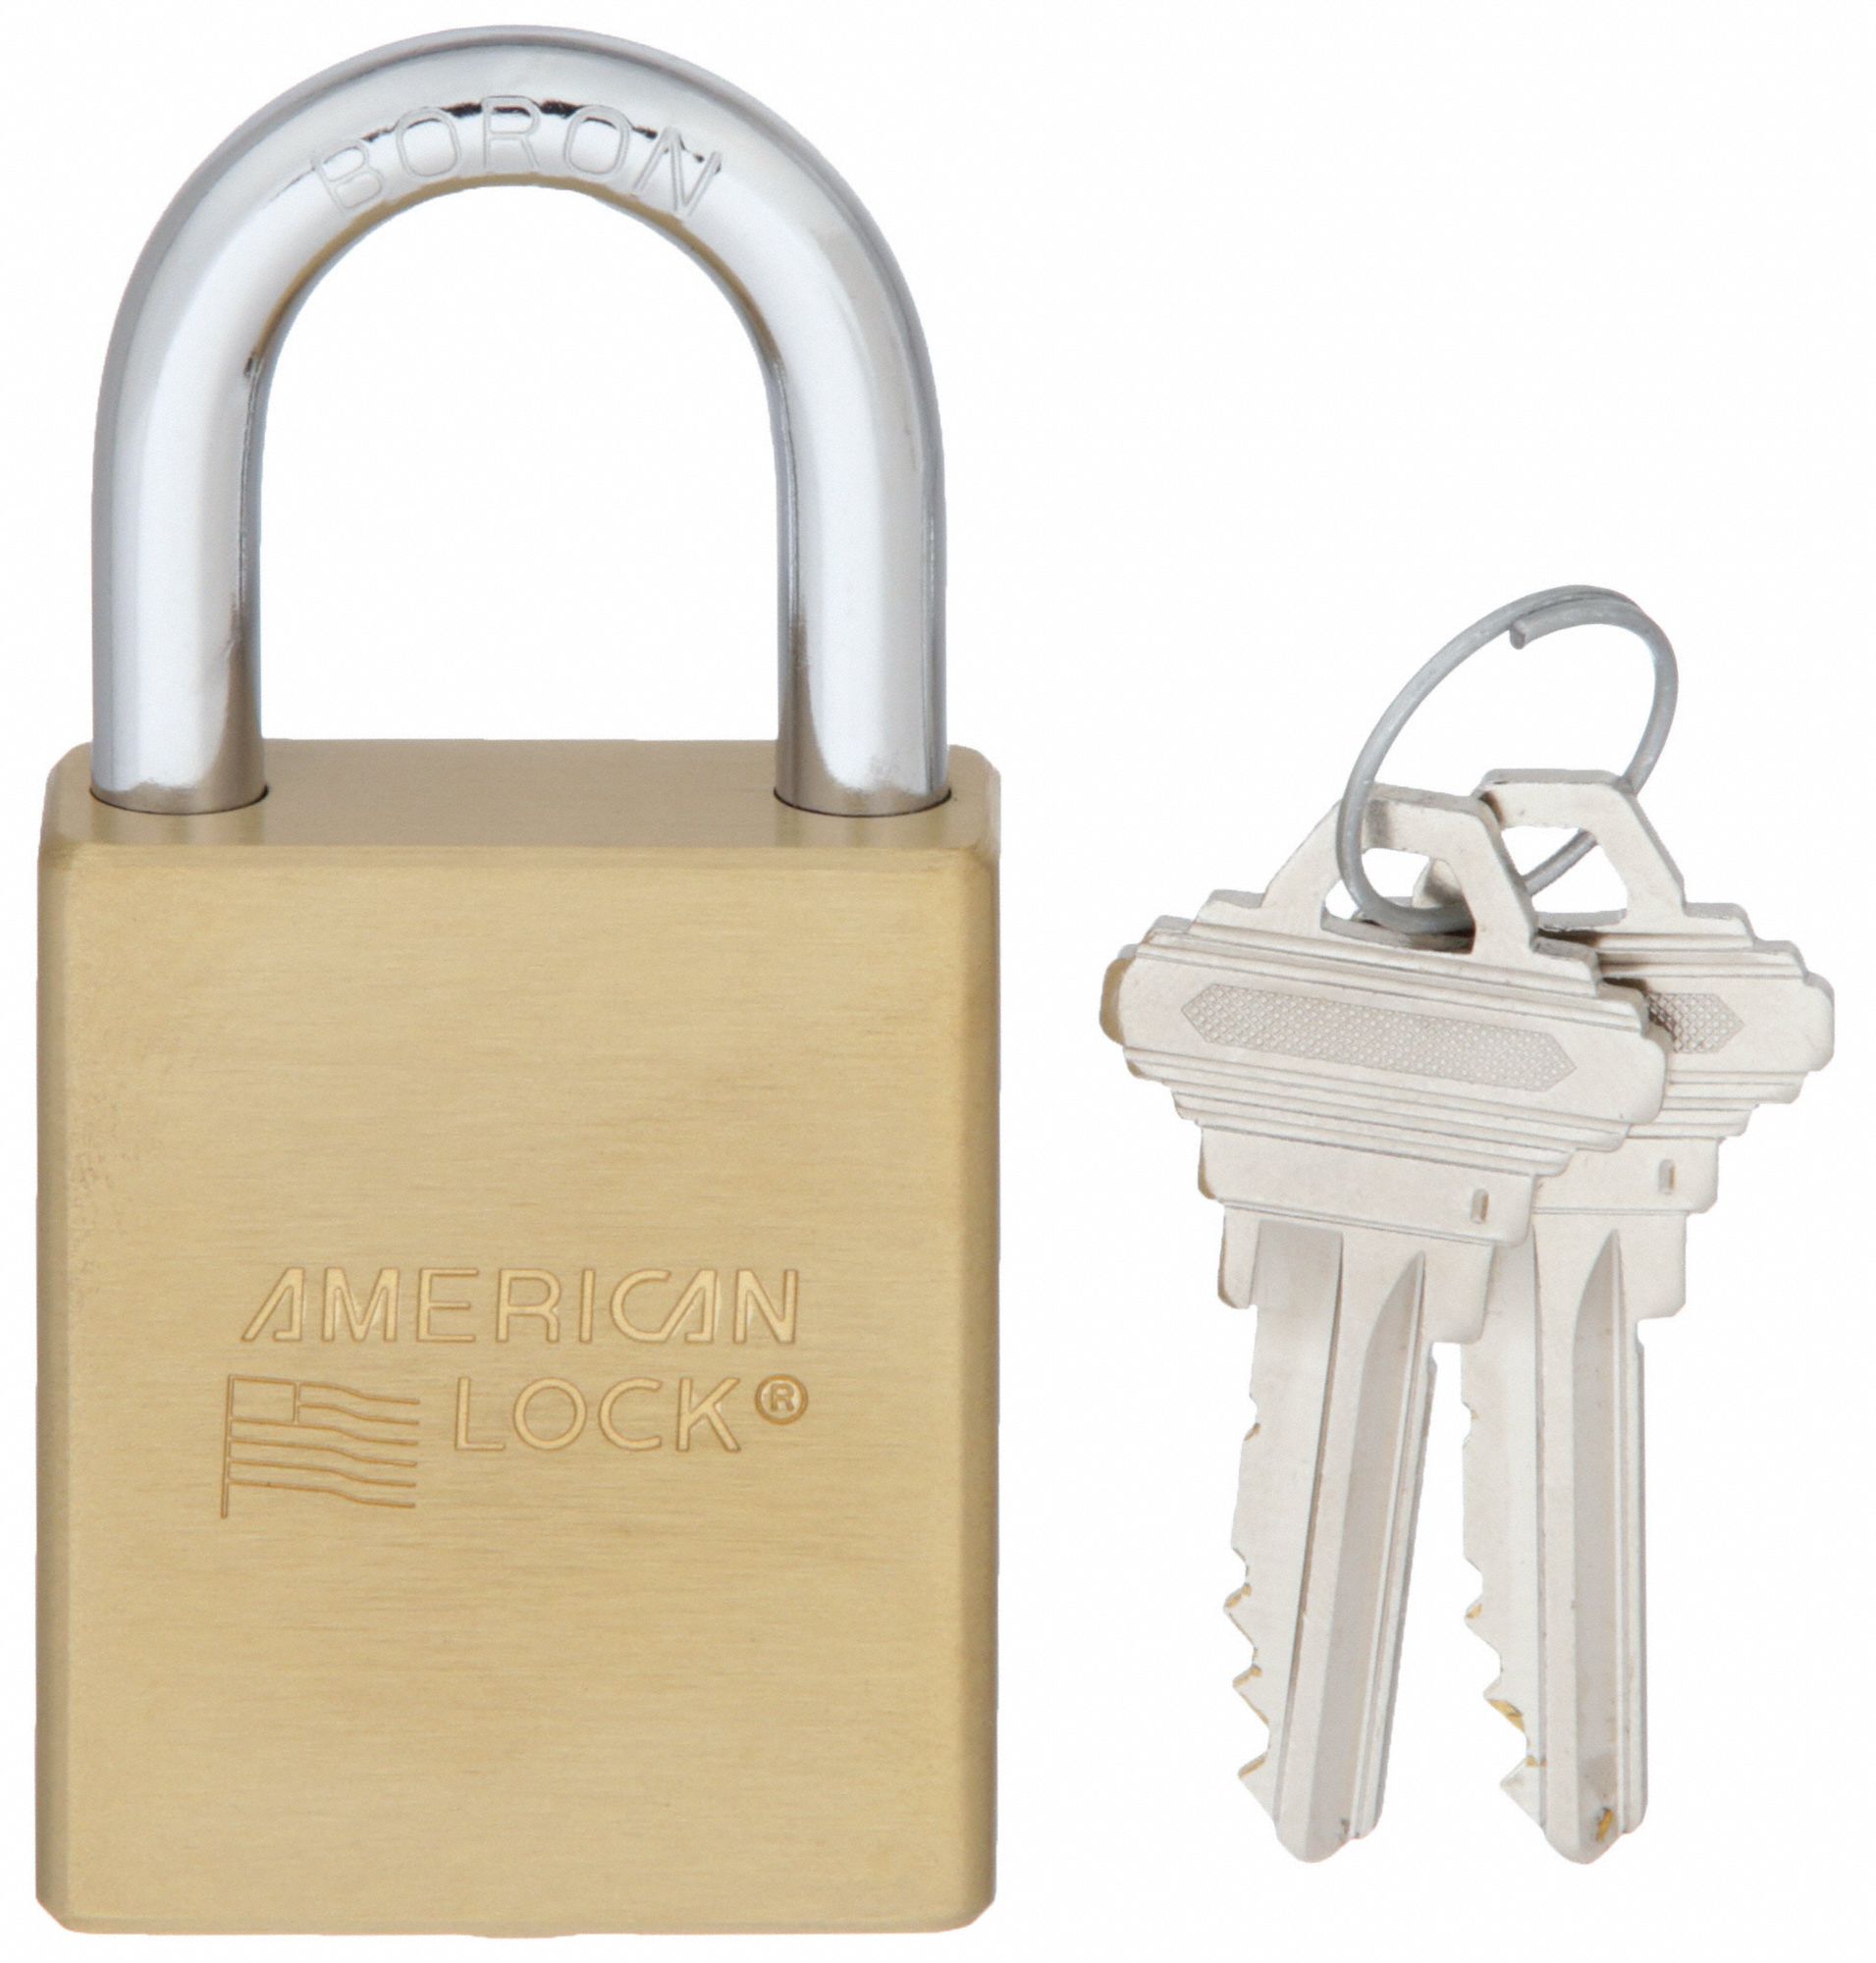 American Lock A3650D045KD Keyed Padlock, 15/16 in, Rectangle, Gold